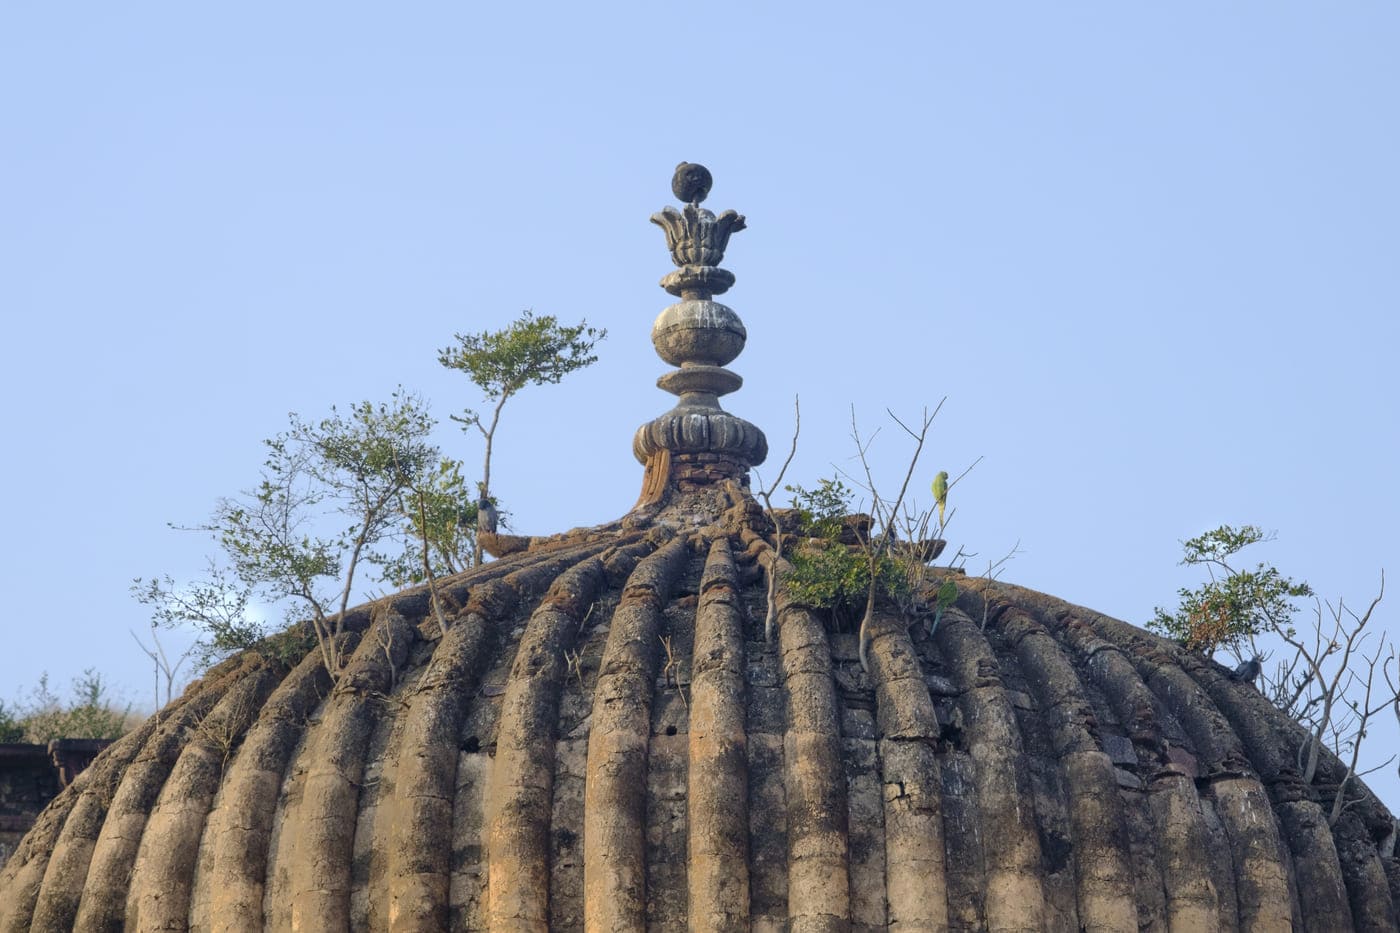 The elaborately carved chhatri or cenotaph is the reminder of the rule of the Bundela Kings in Madhya Pradesh centuries ago, Orchha 